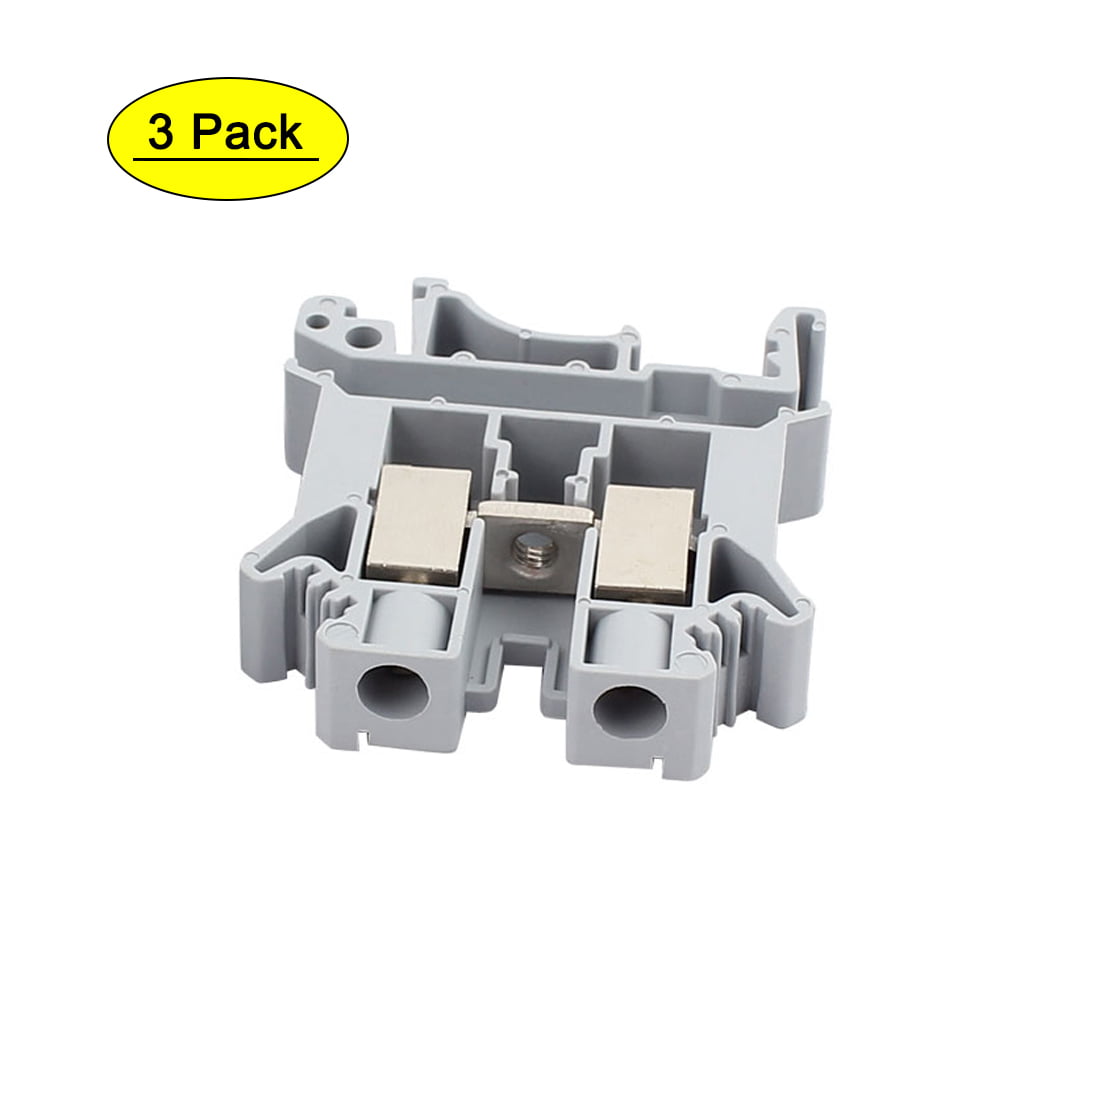 uxcell 10Pcs MBKKB2.5 DIN Rail Mount Double-Level Terminal Block 500V 2.5mm2 Cable Gray